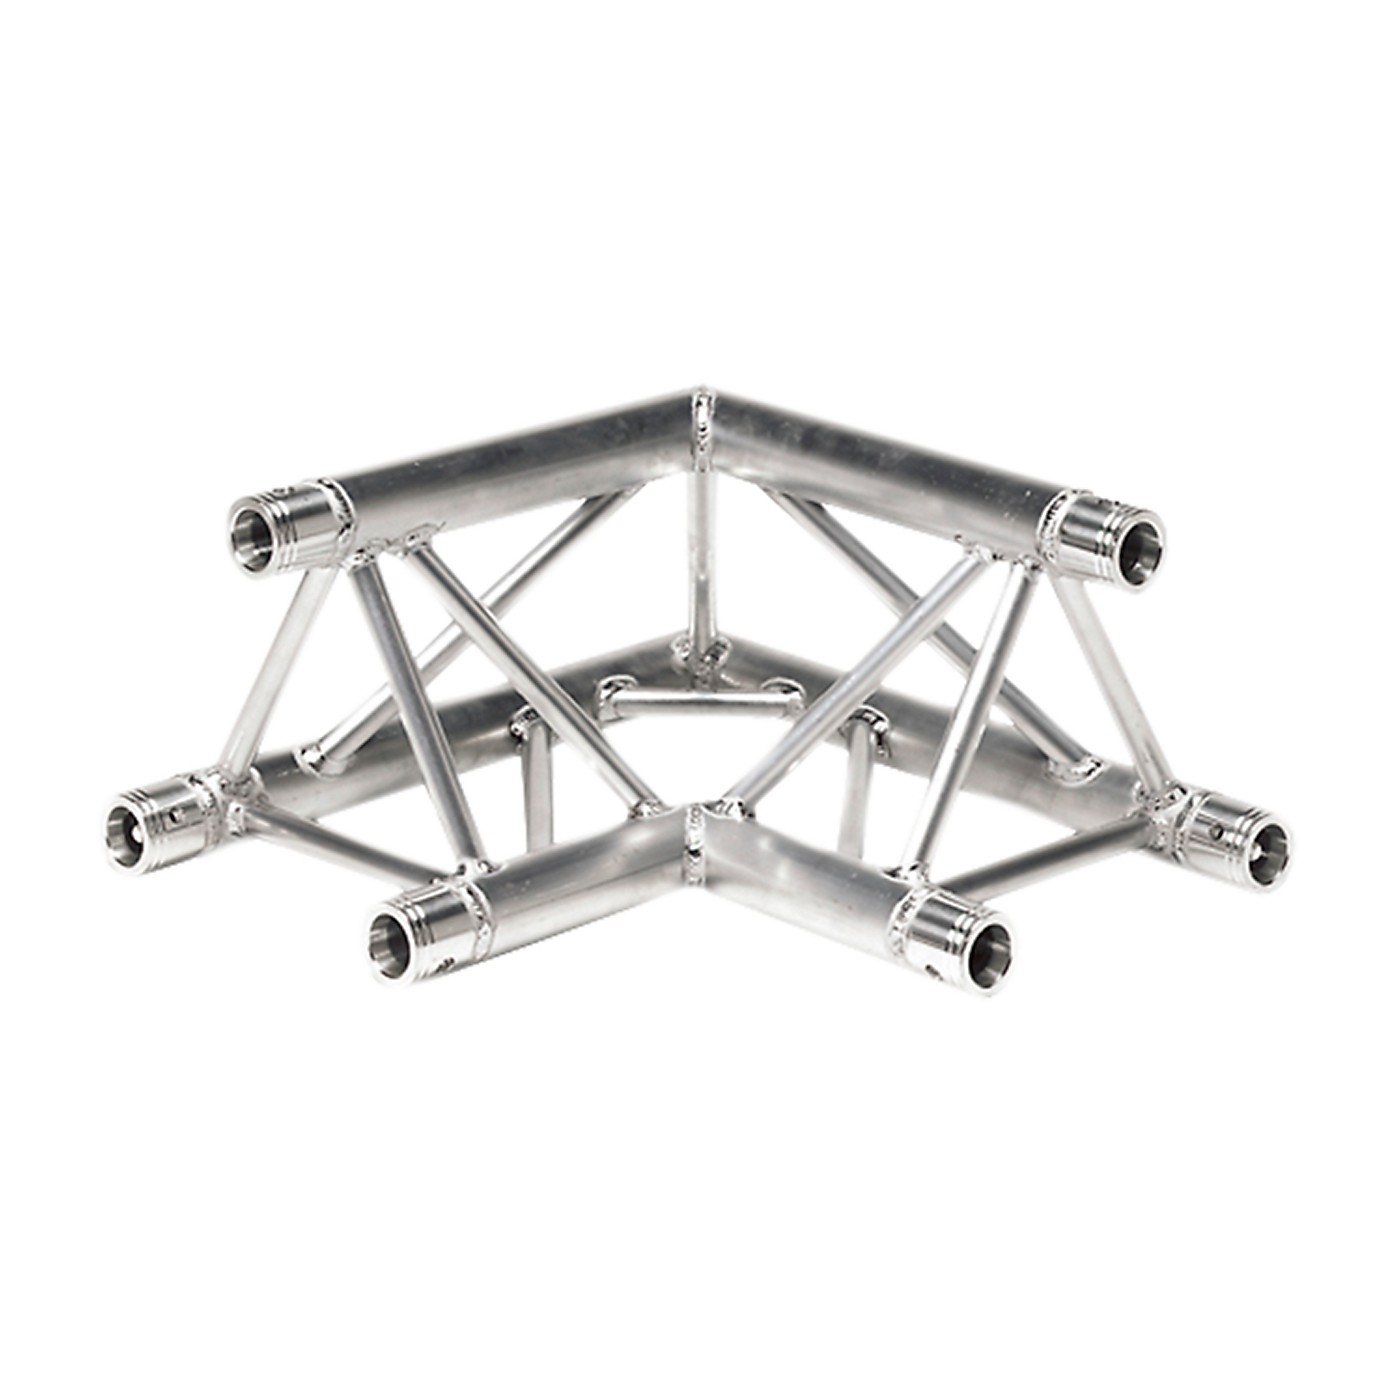 GLOBAL TRUSS TR4088UD 1.64 Ft. (.5 M) 2-Way 90-Degree Up/Down Corner Triangle Truss thumbnail